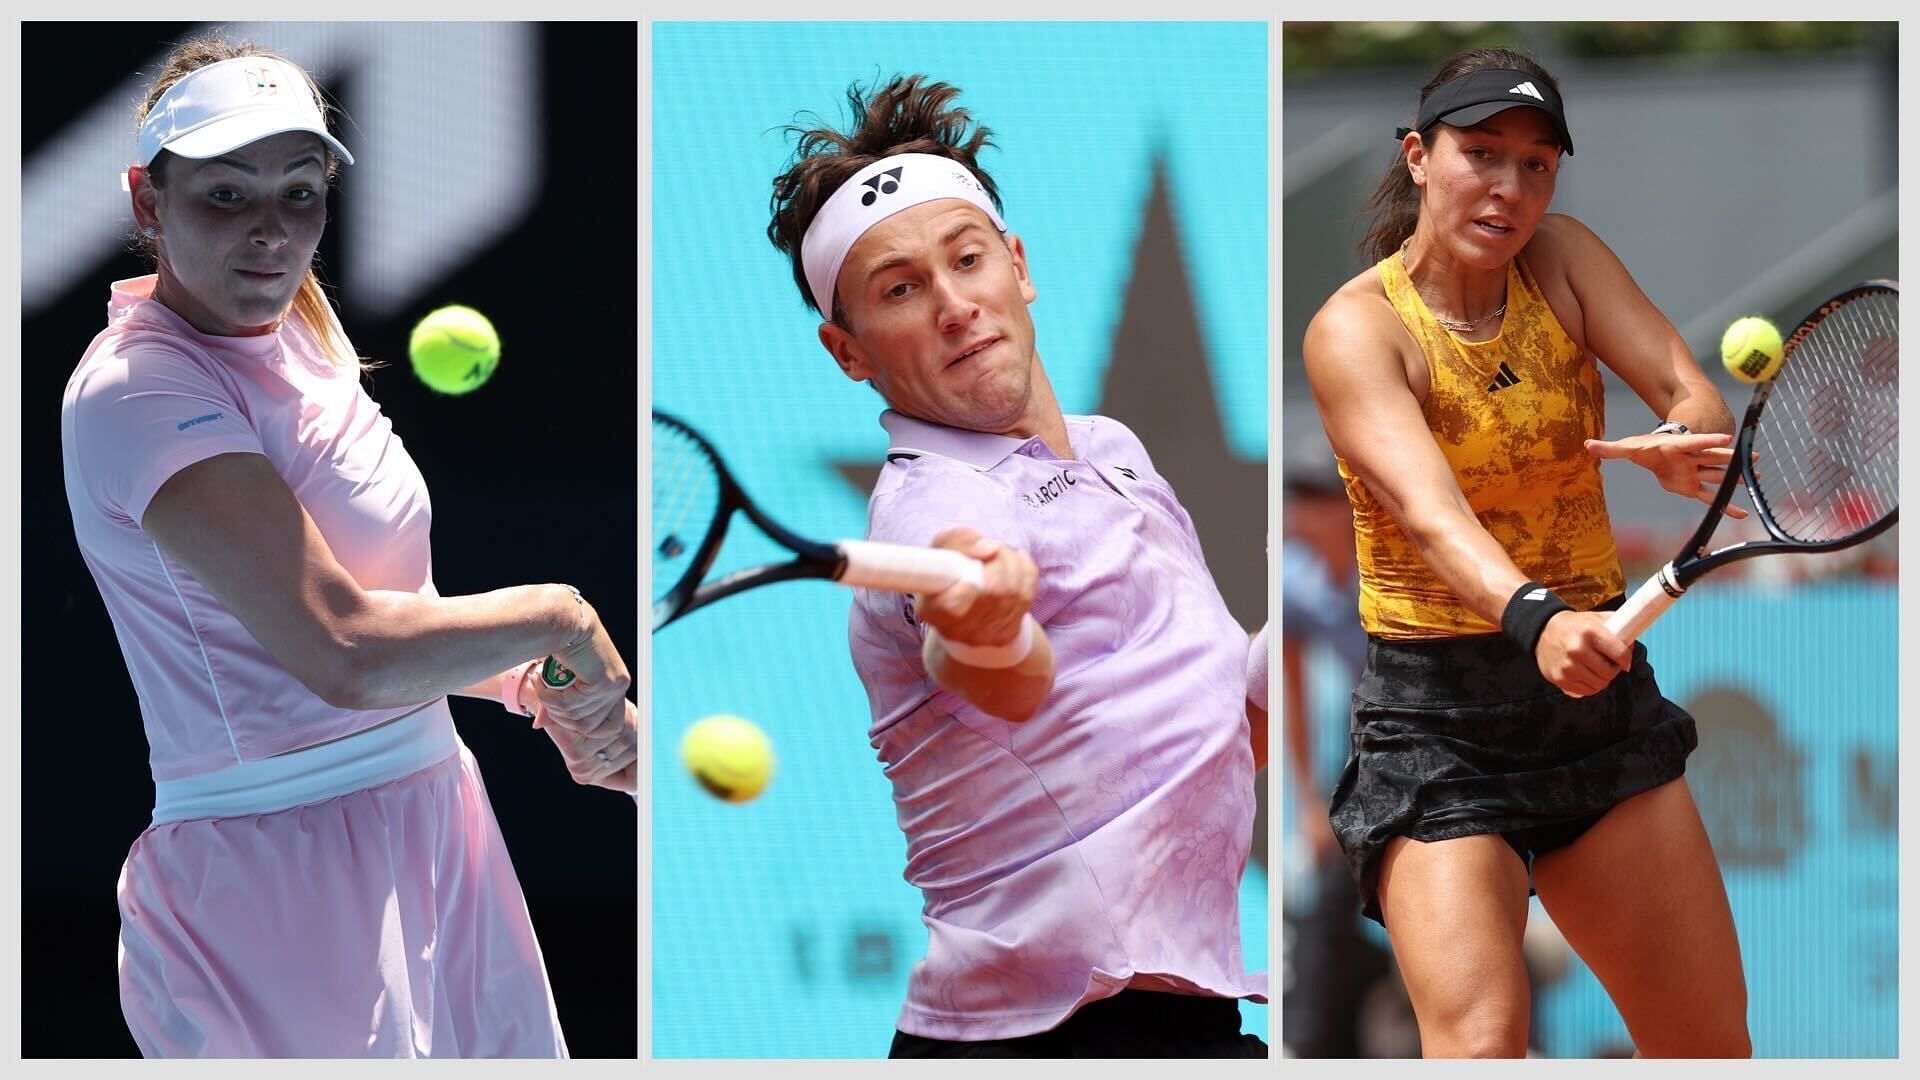 Casper Ruud, Donna Vekic and Jessica Pegula miffed with delayed Italian Open schedule release